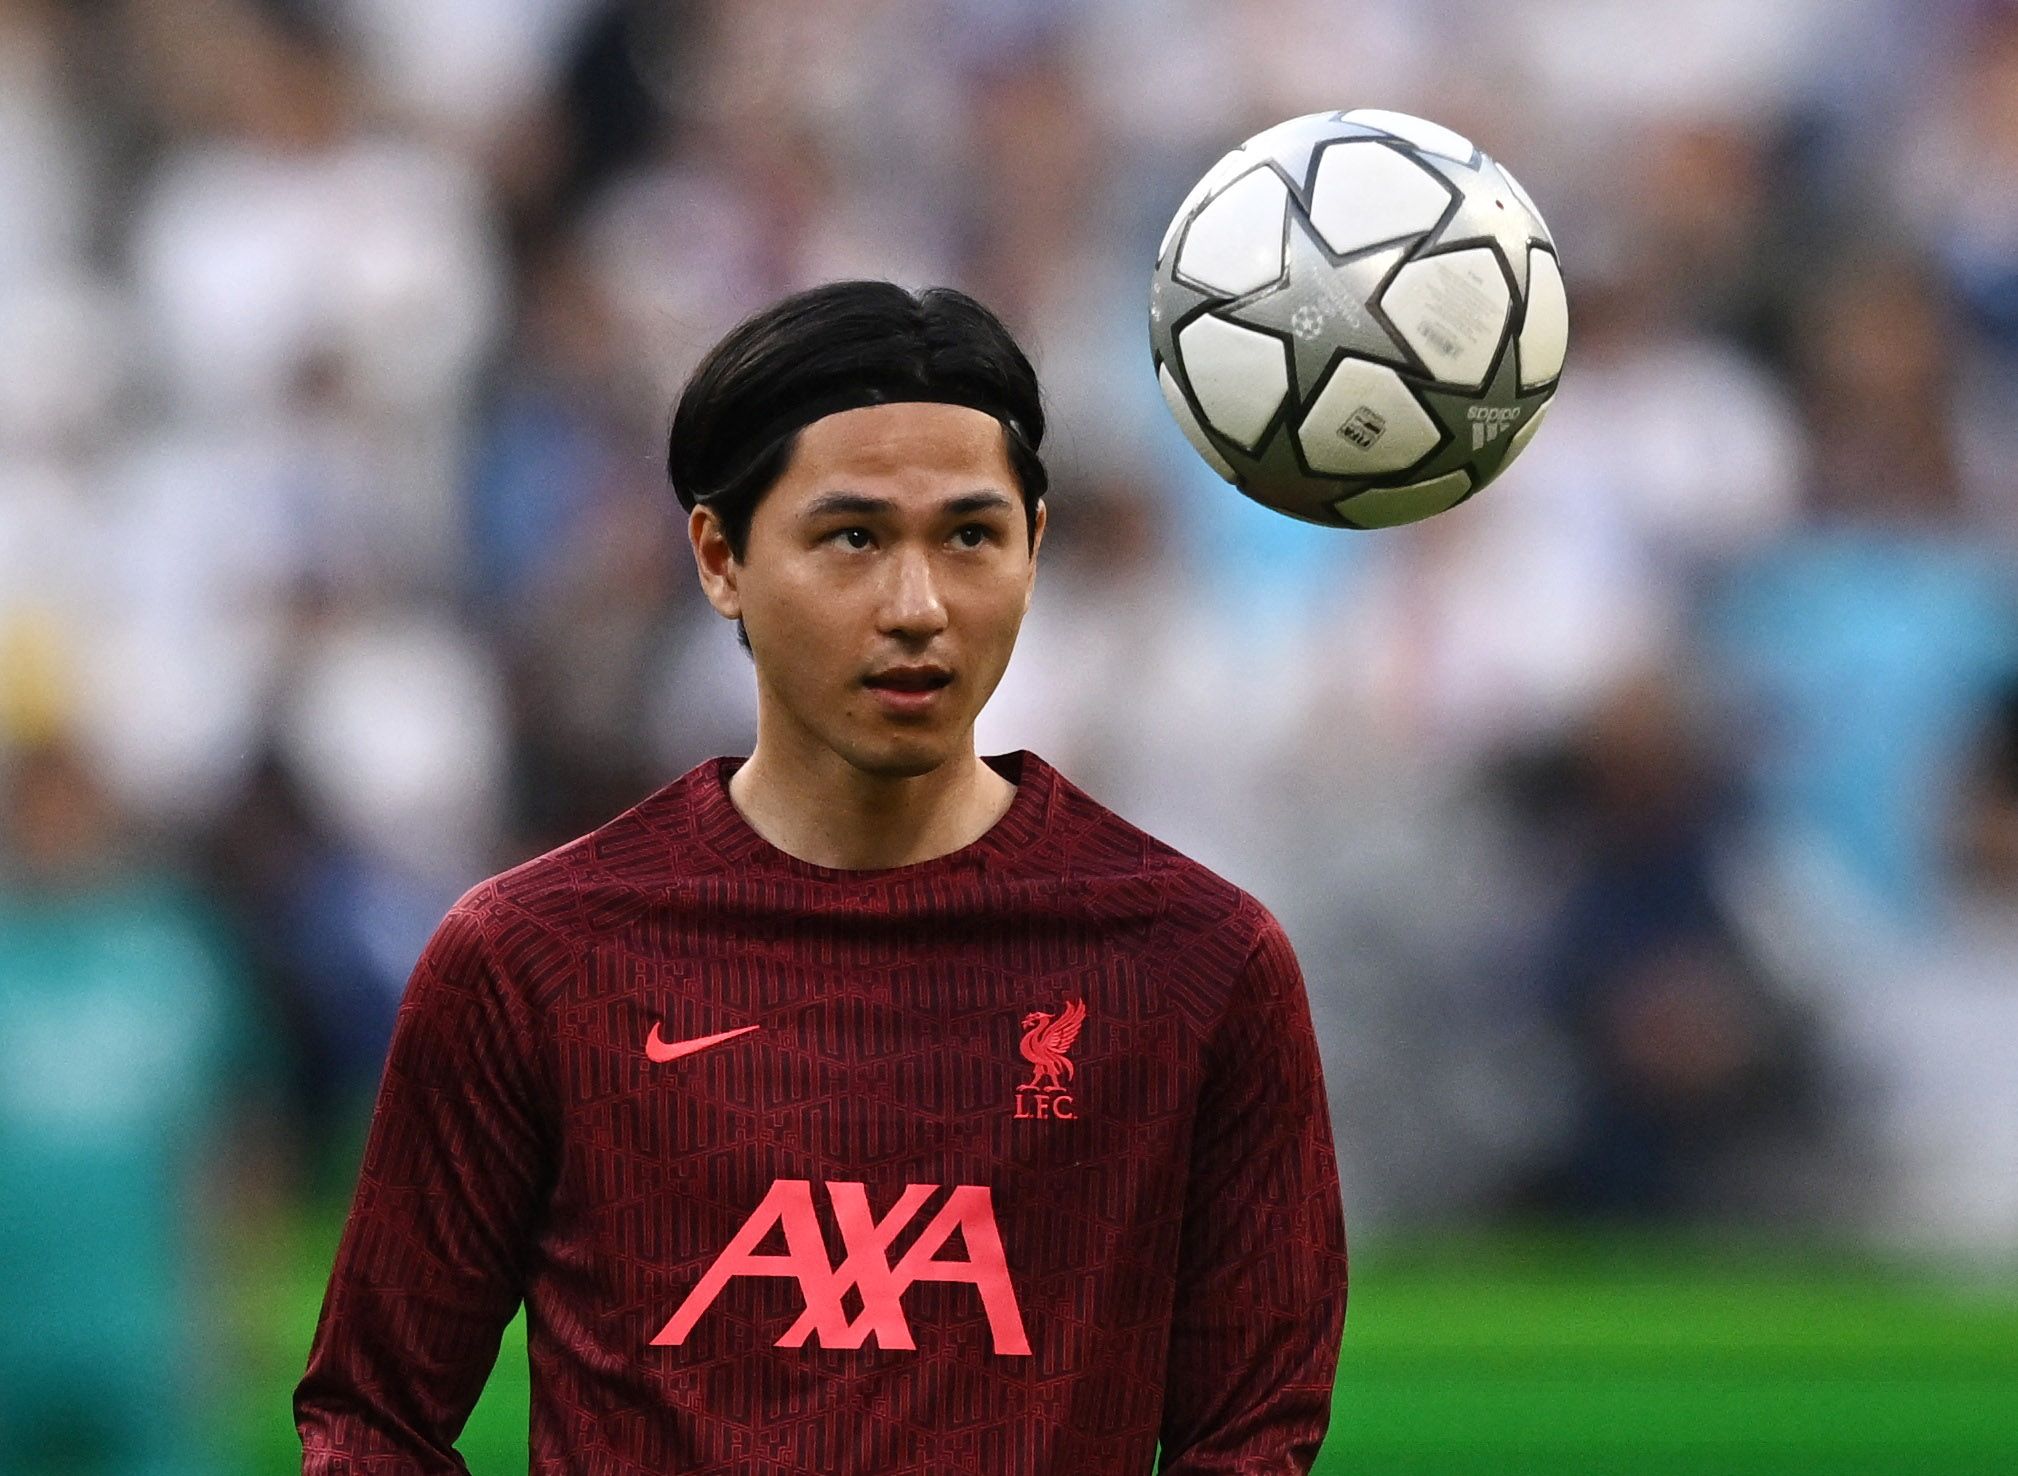 Soccer Football - Champions League Final - Liverpool v Real Madrid - Stade de France, Saint-Denis near Paris, France - May 28, 2022 Liverpool's Takumi Minamino during the warm up before the match REUTERS/Dylan Martinez